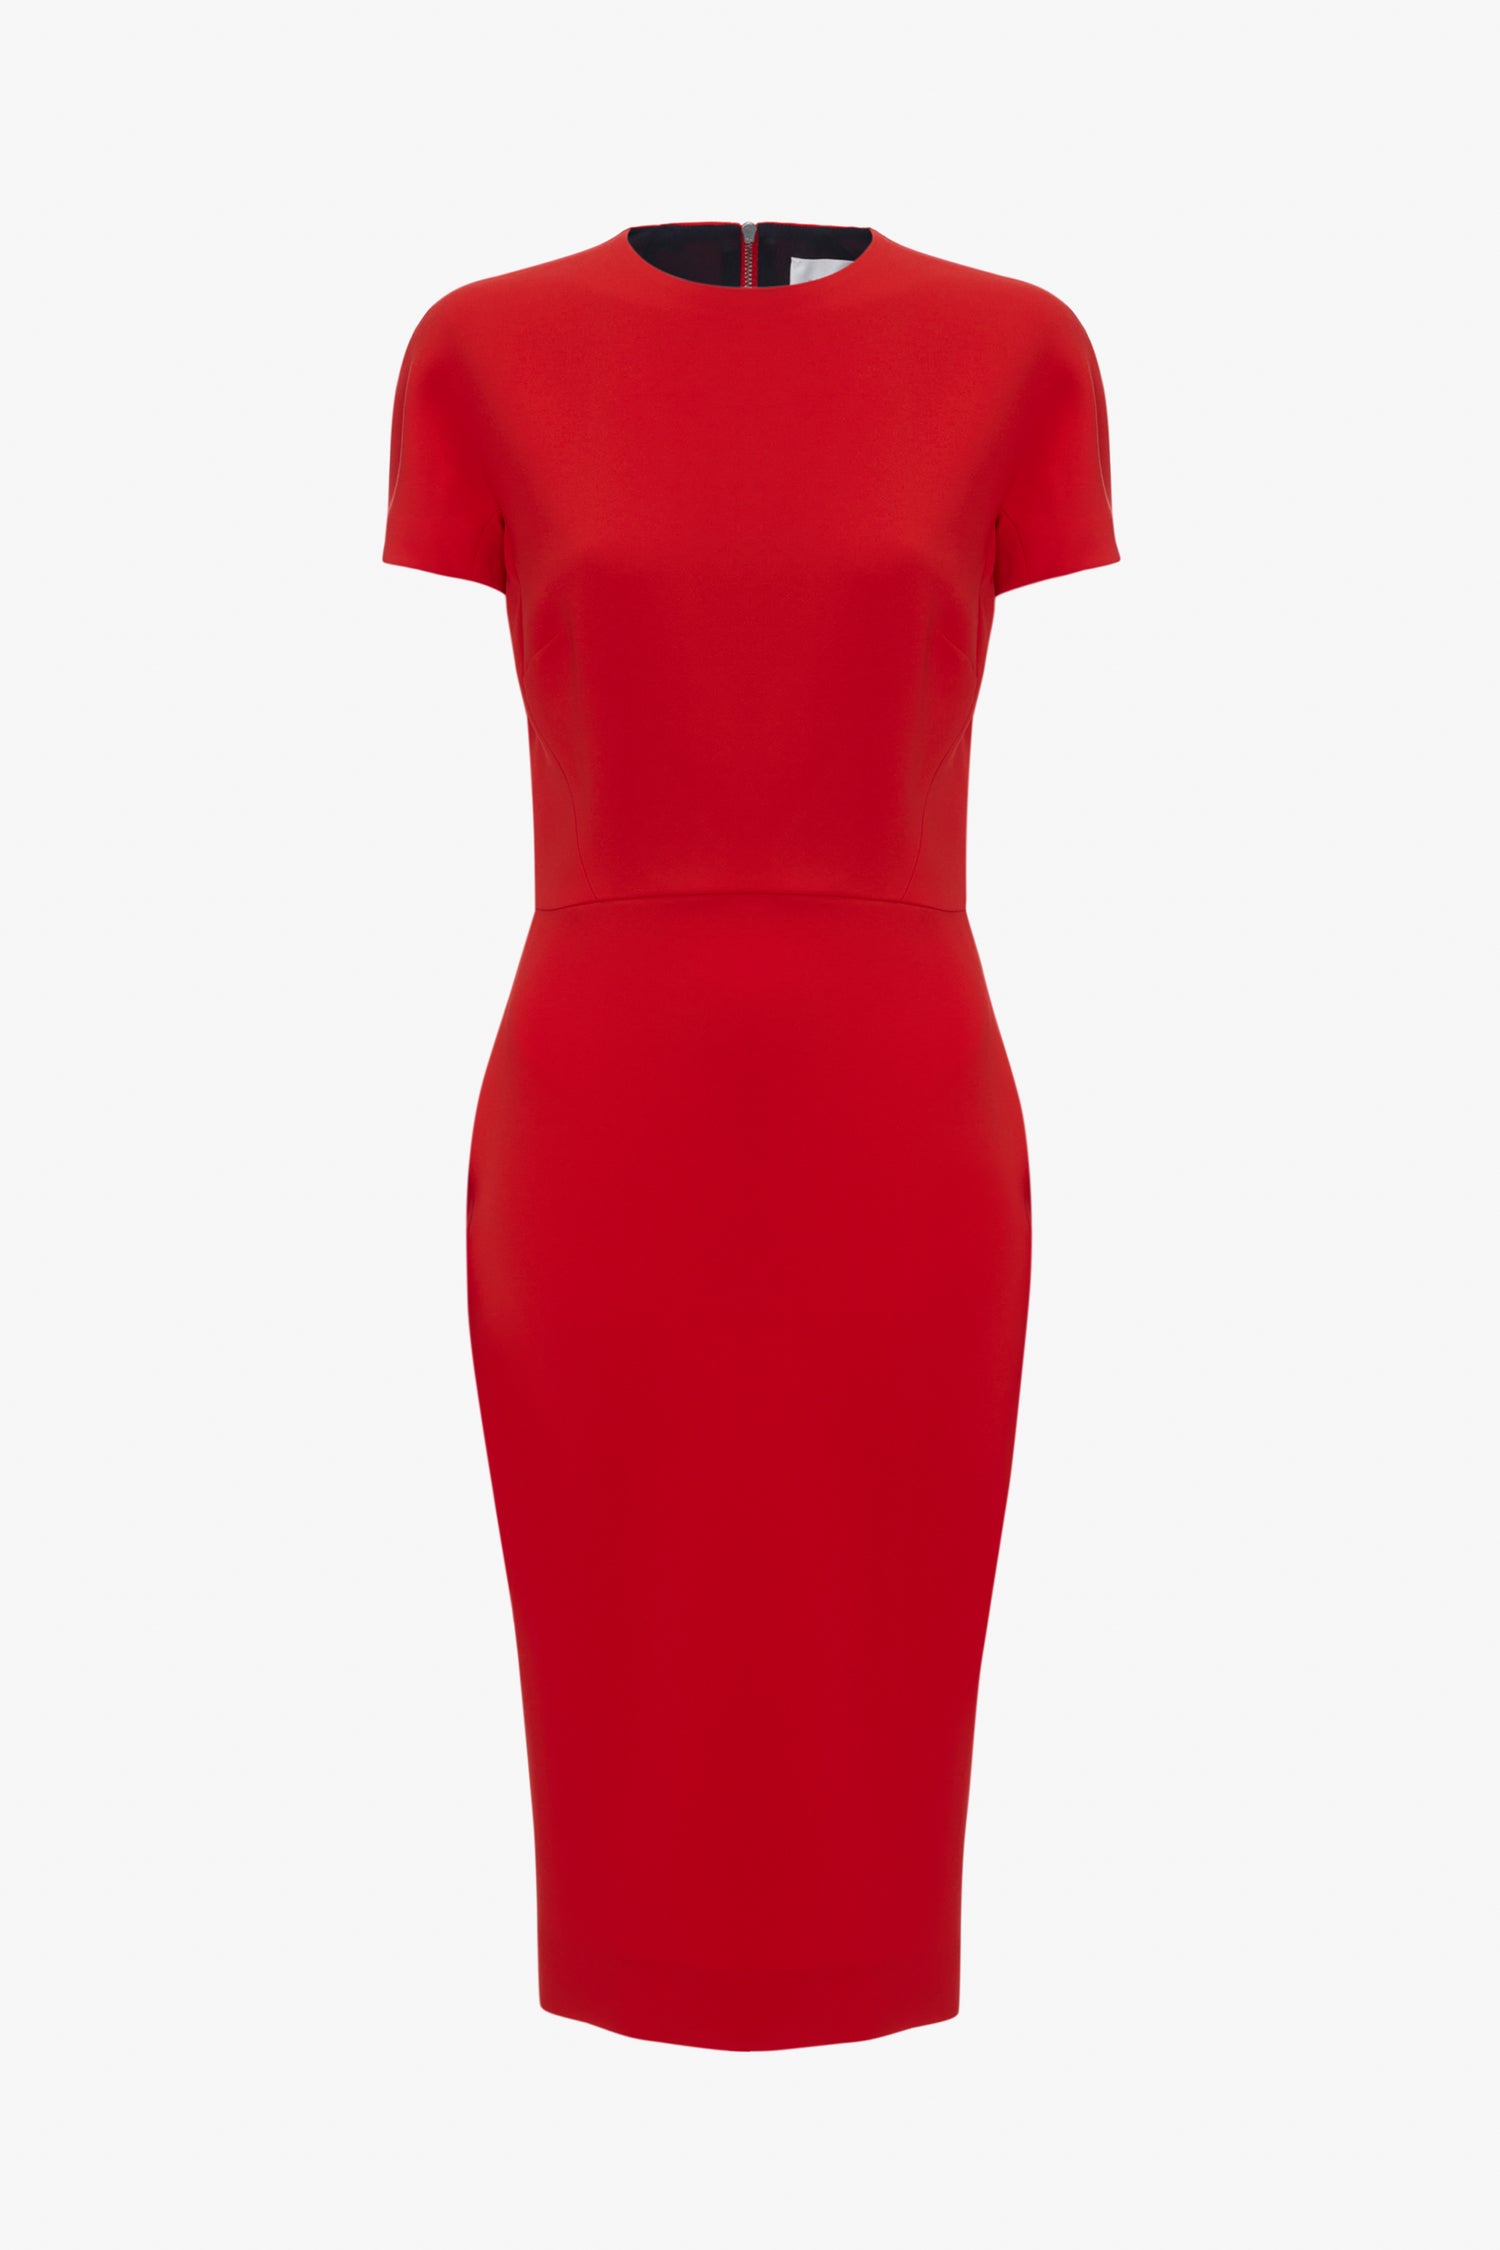 Victoria Beckham's bright red knee-length fitted T-shirt dress with short sleeves and a round neckline, isolated on a white background.